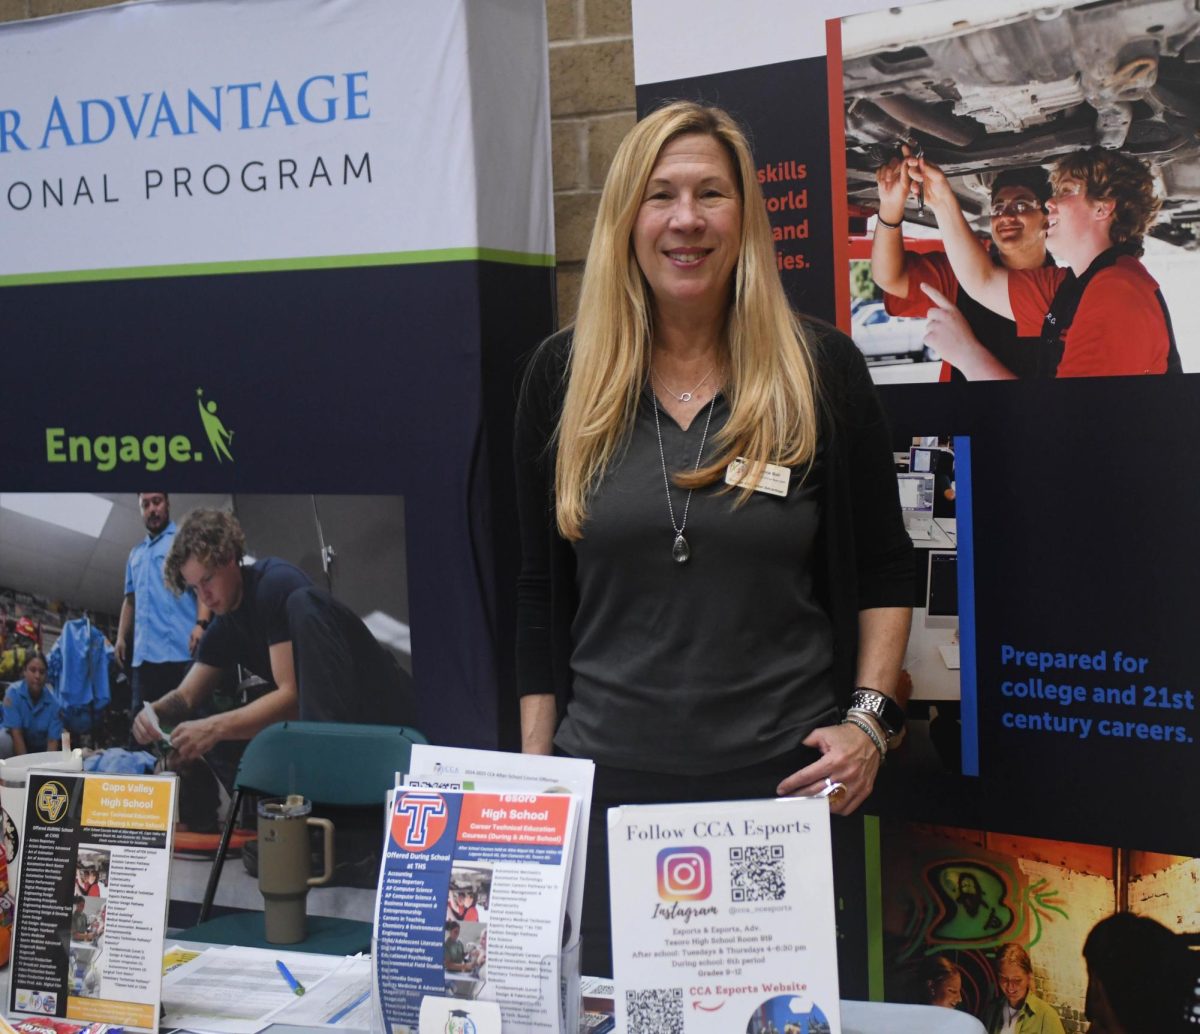 Guidance+Specialist+Lynne+Bell+distributes+helpful+information+at+the+College+and+Career+Advantage+booth+at+the+career+fair+held+at+San+Juan+Hills+High+School+on+March+18%2C+2024.